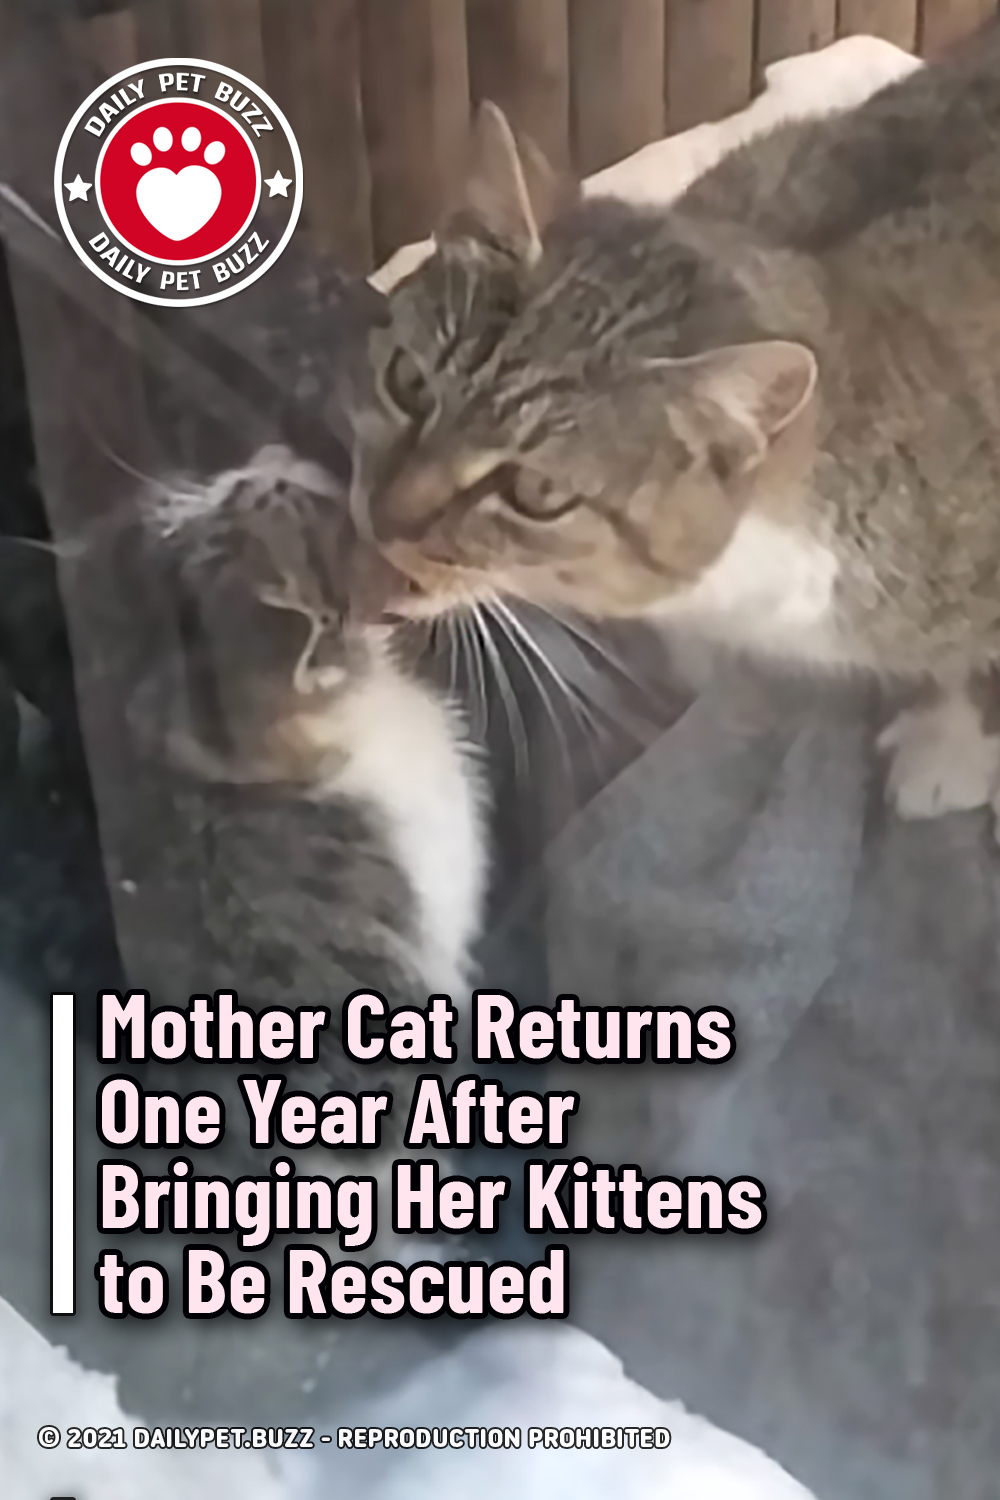 Mother Cat Returns One Year After Bringing Her Kittens to Be Rescued